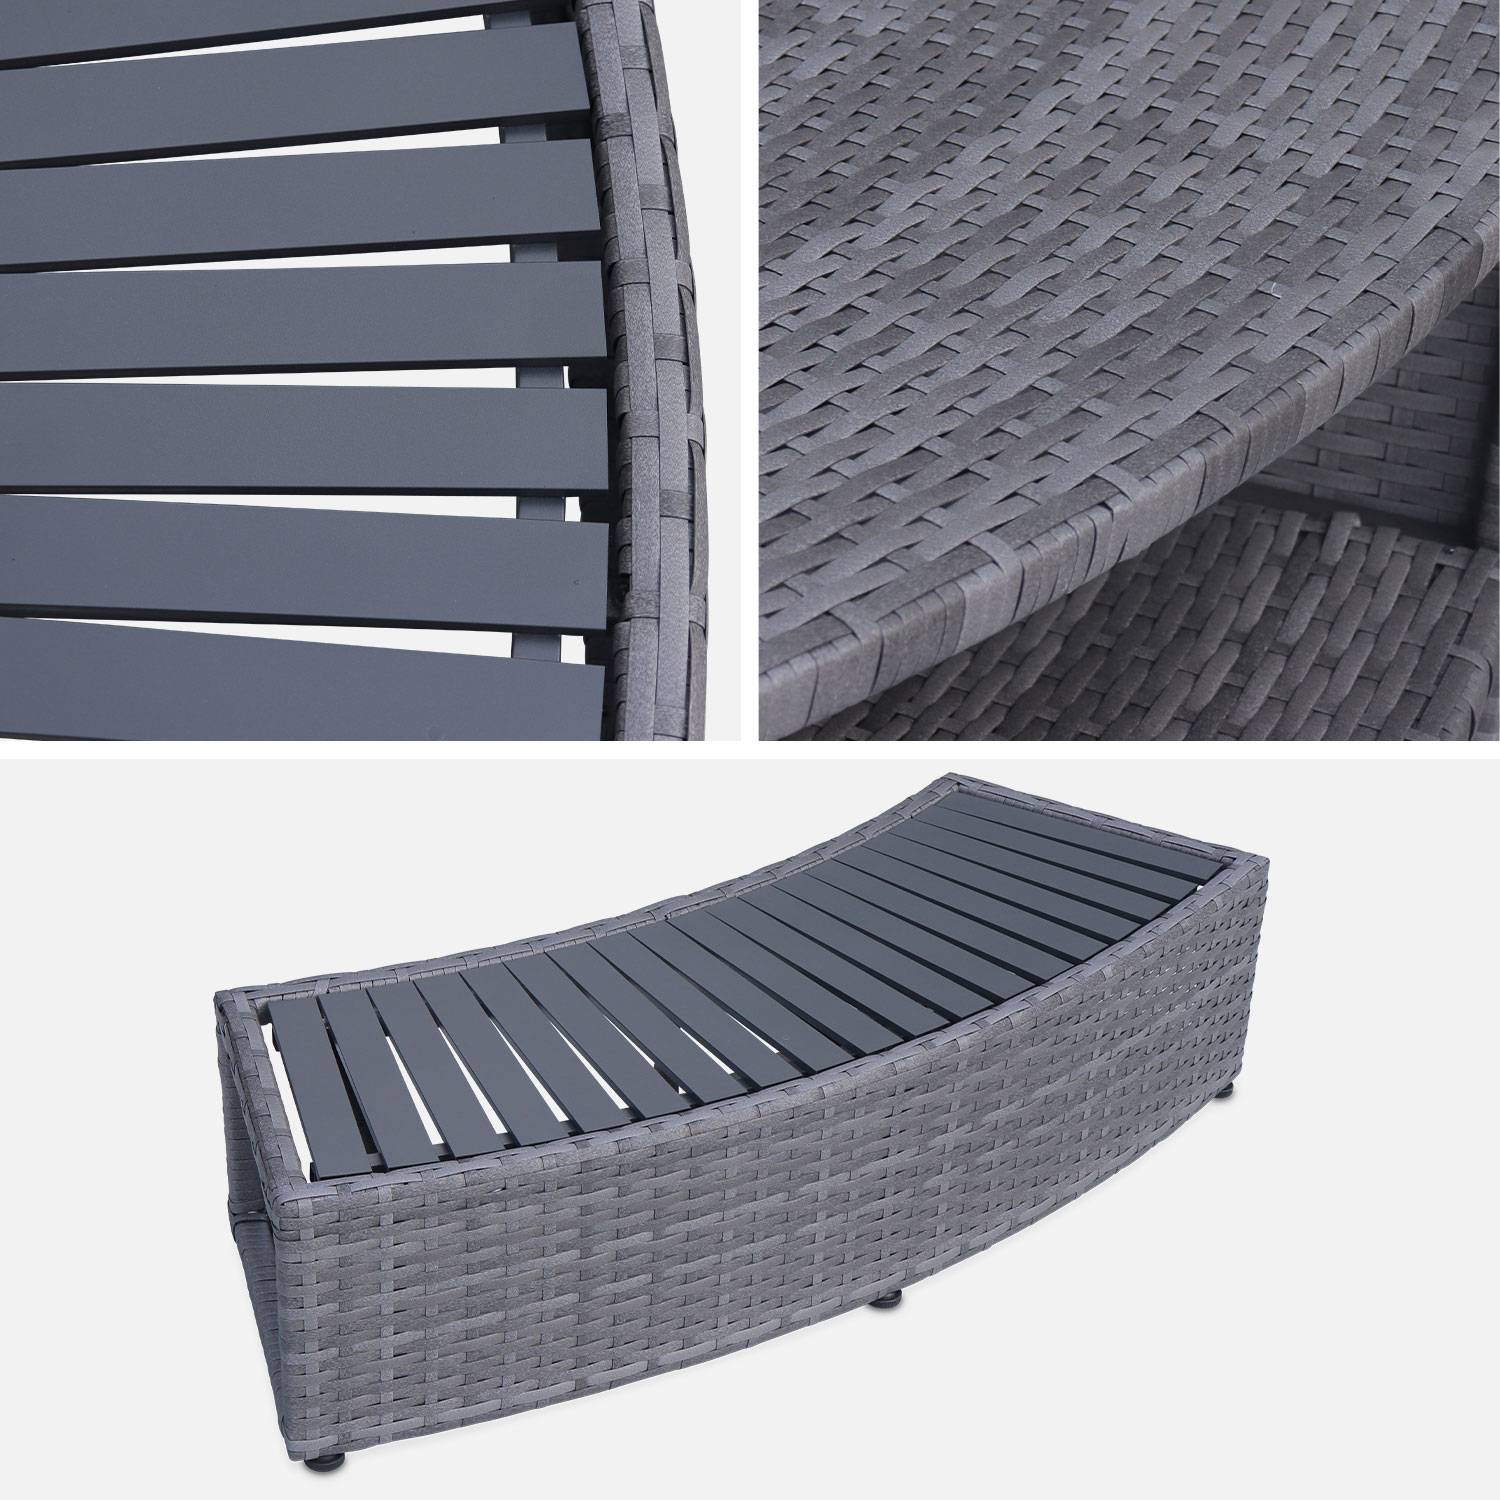 Grey polyrattan for hot tub surrond for 4 or 6 seater hot tub 180 x 70 cm - aluminium structure, shelves, cabinet and footstep,sweeek,Photo6